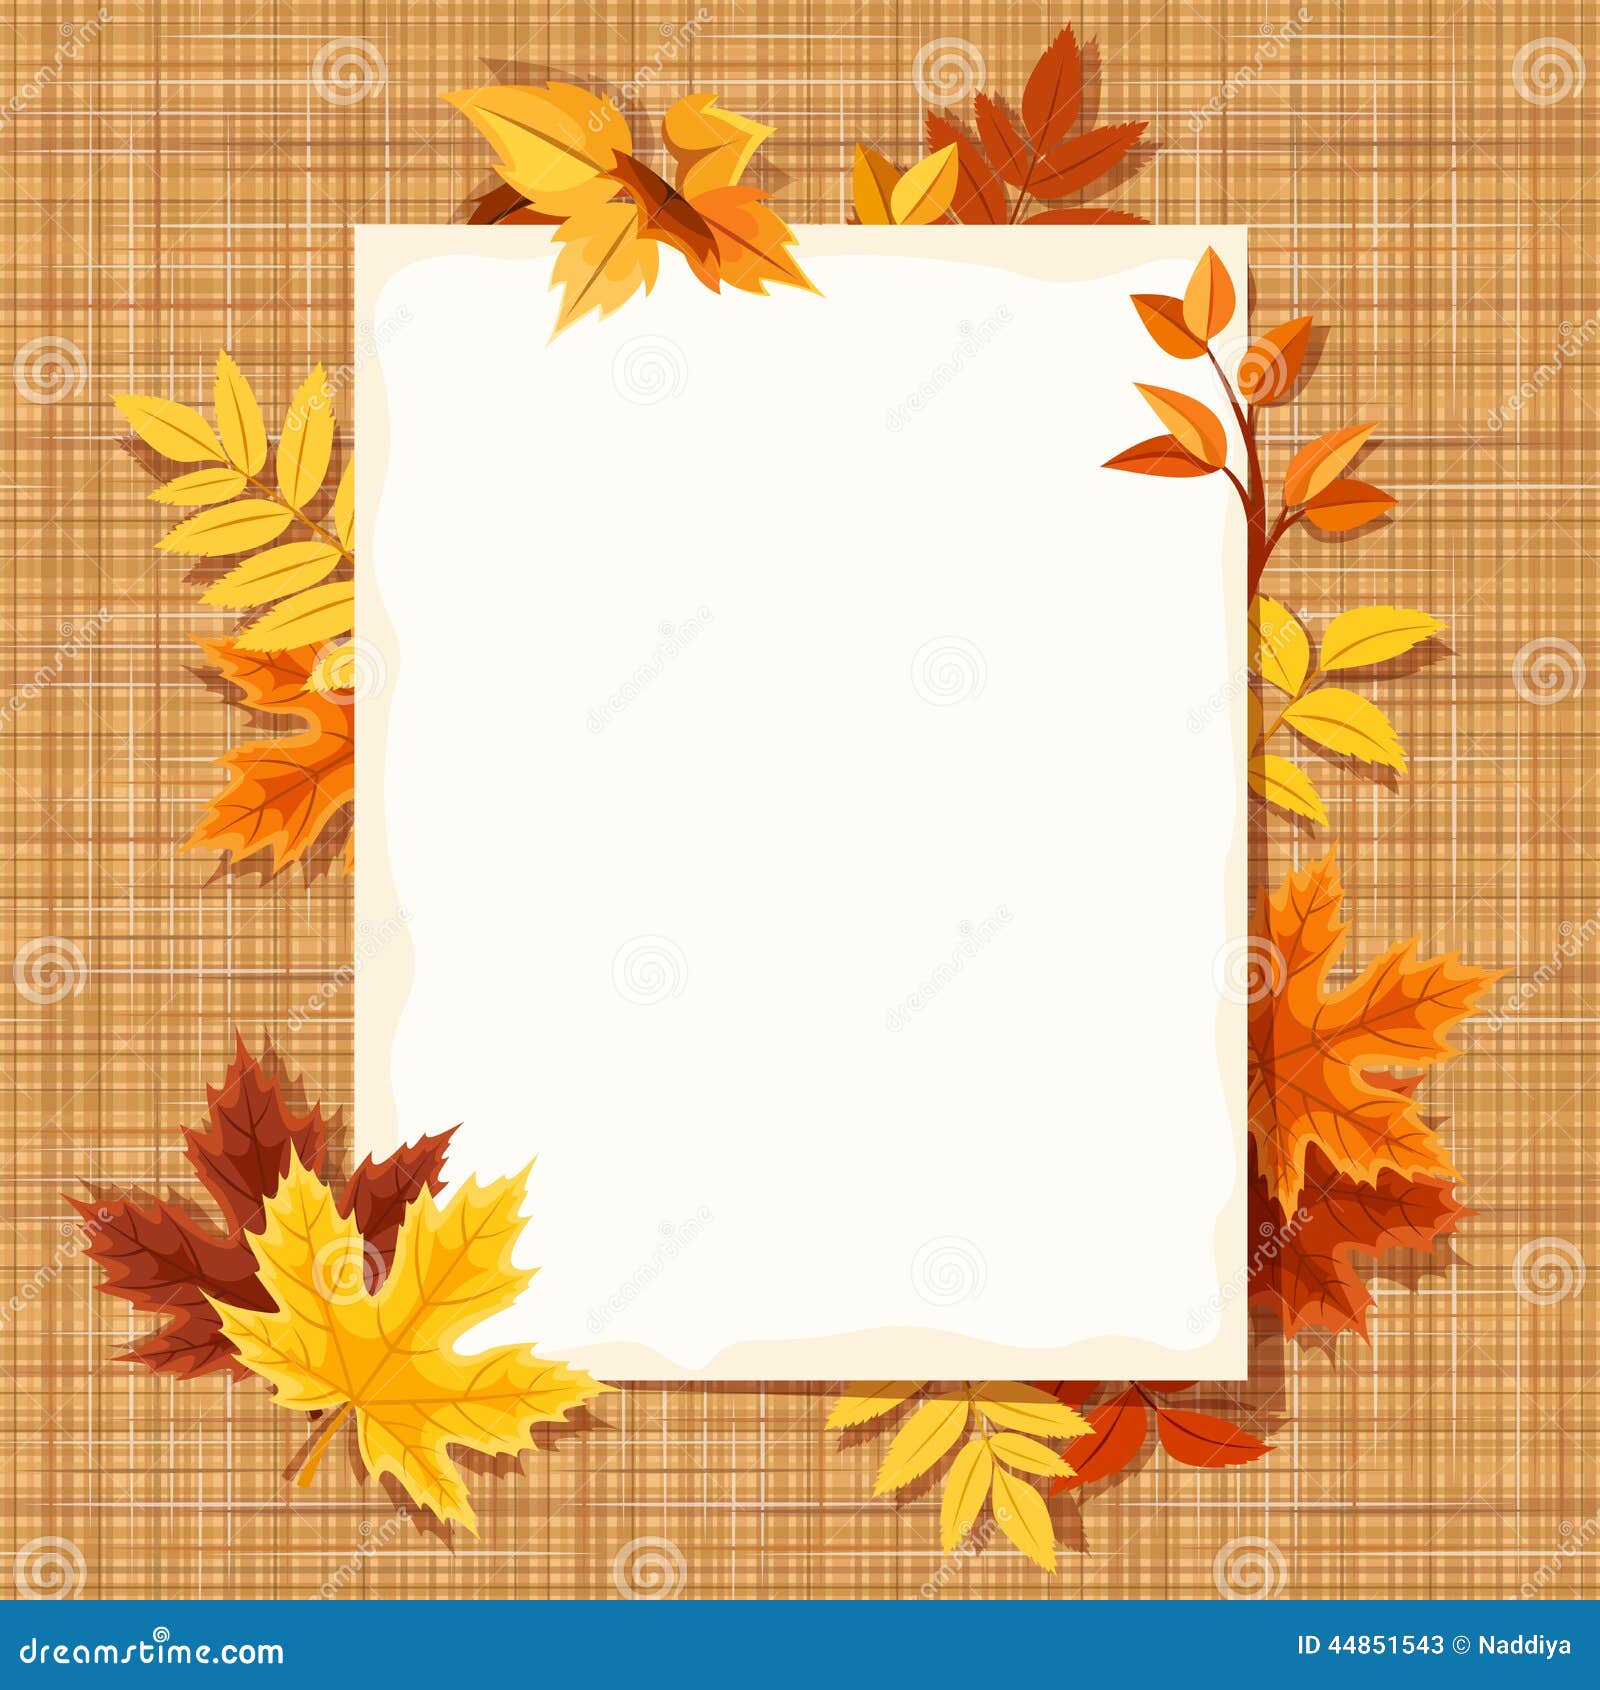 Autumn Leaves And A Paper Sheet On A Sacking Fabric. Vector Eps-10. Stock Vector ...